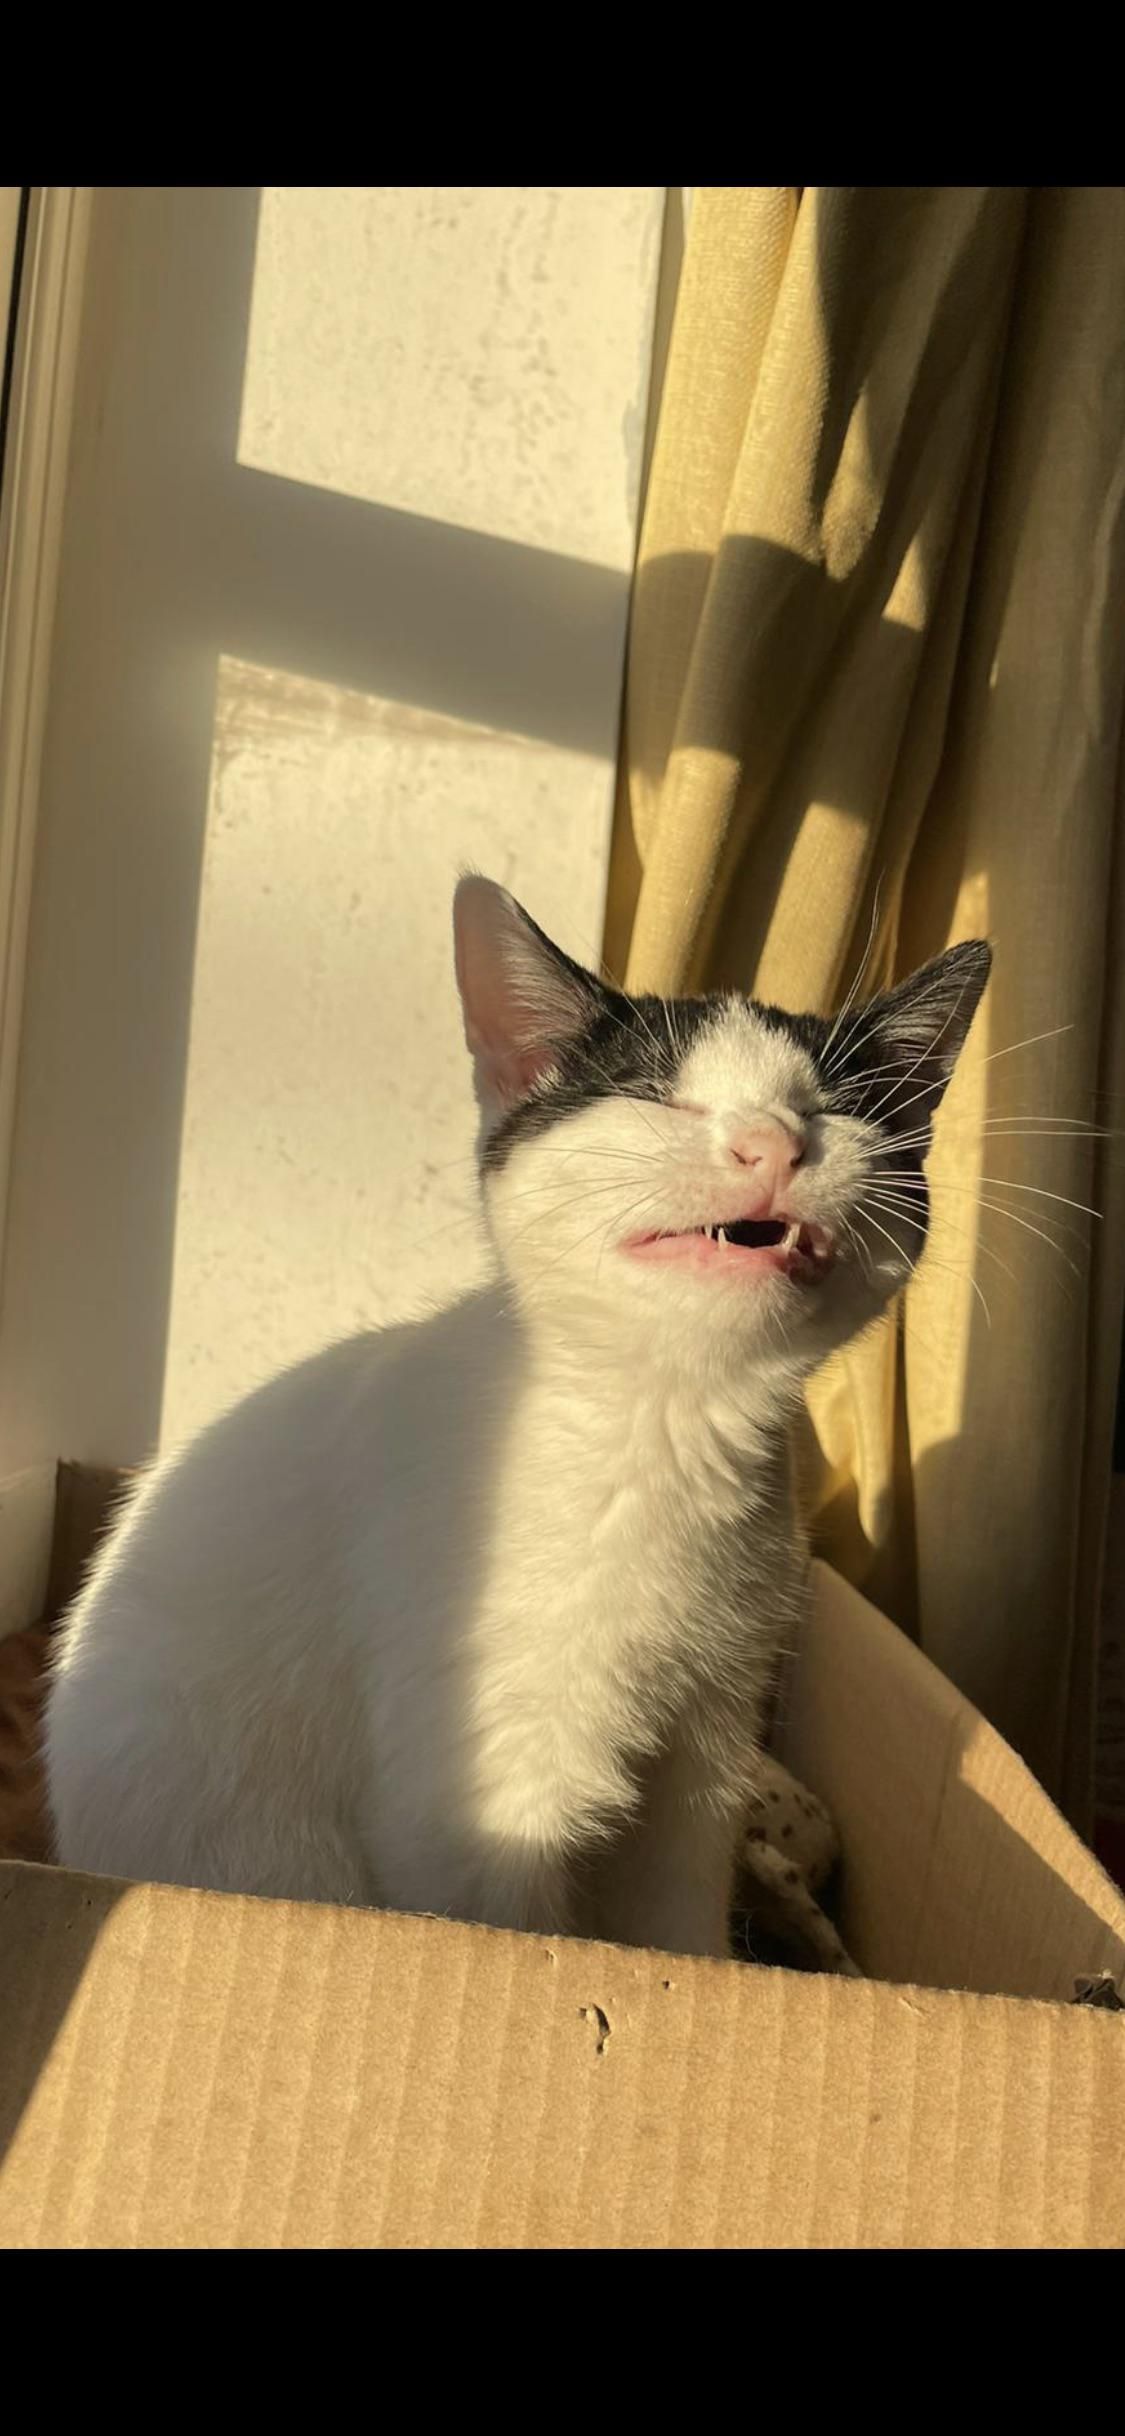 This picture of my housemate’s cat right before sneezing